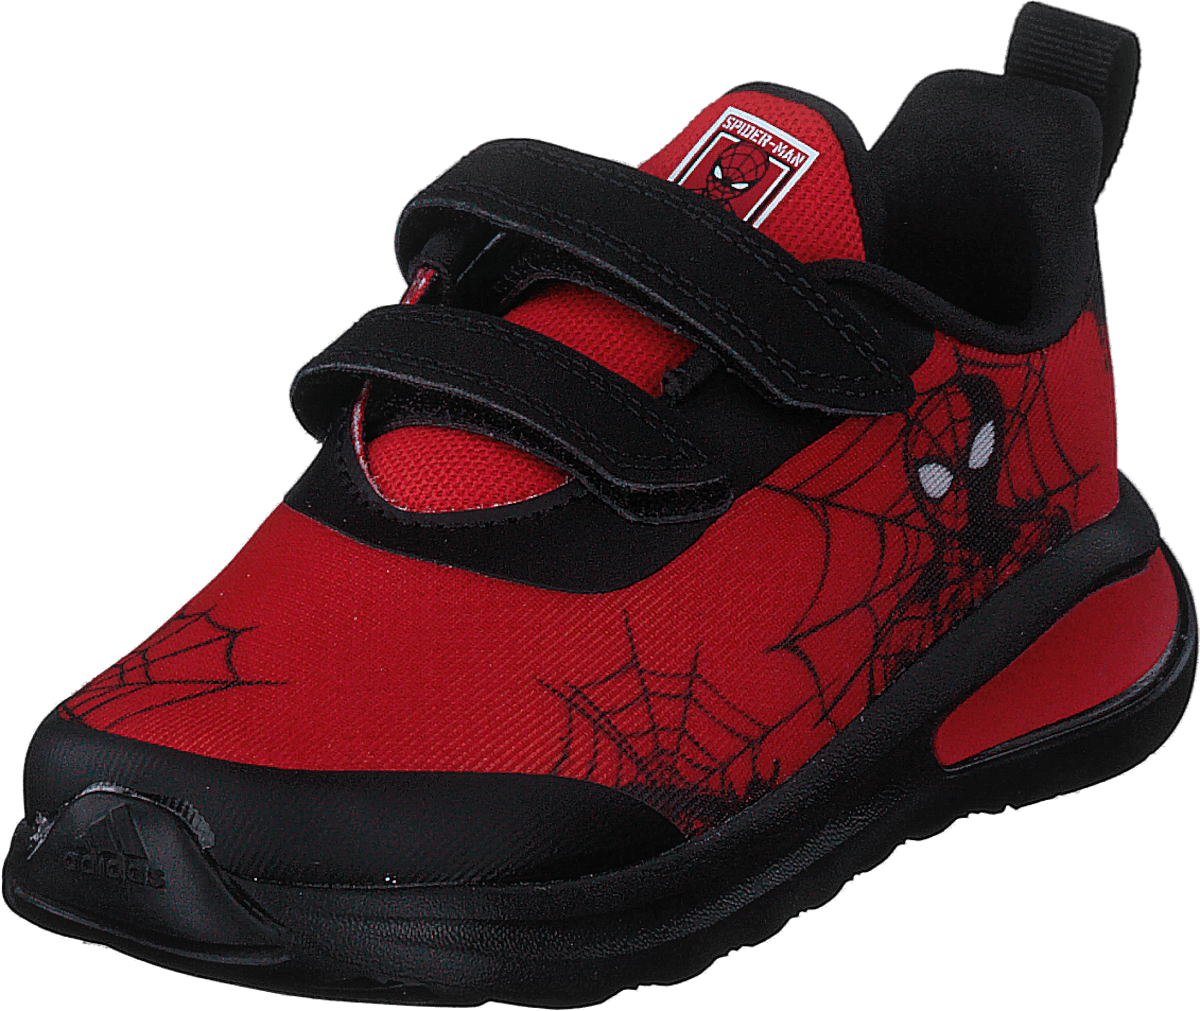 adidas x Marvel Spider-Man Fortarun Shoes Vivid Red / Core Black / Cloud White